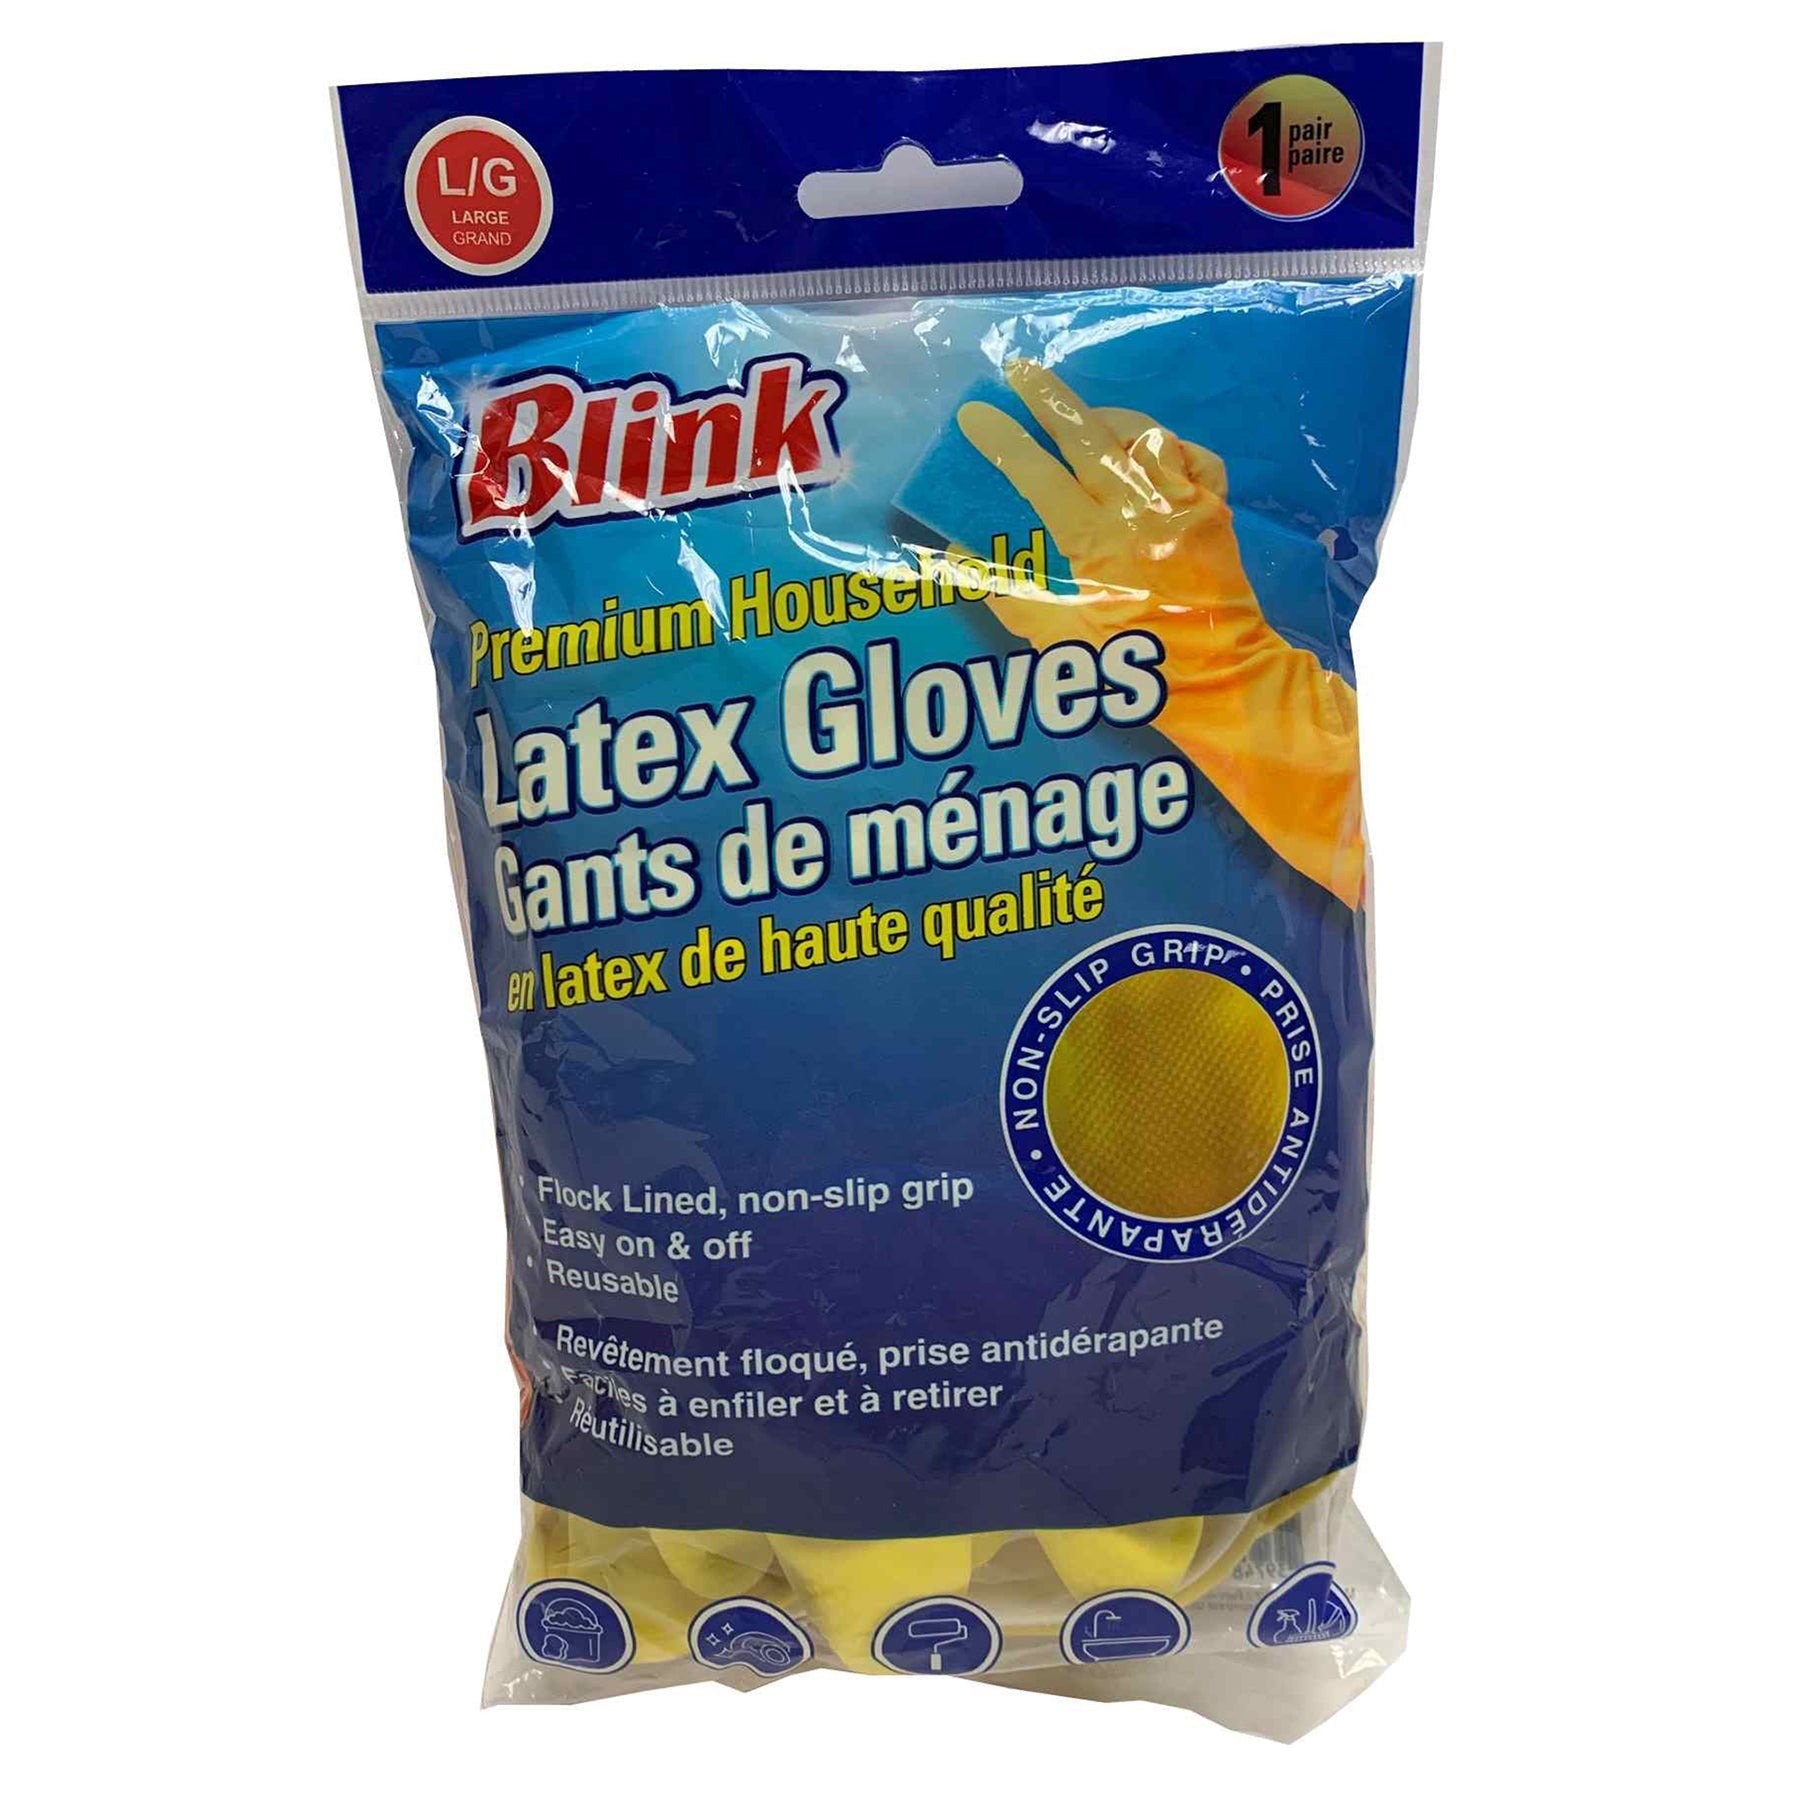 Blink 1 Pair of Yellow Latex Gloves - Large